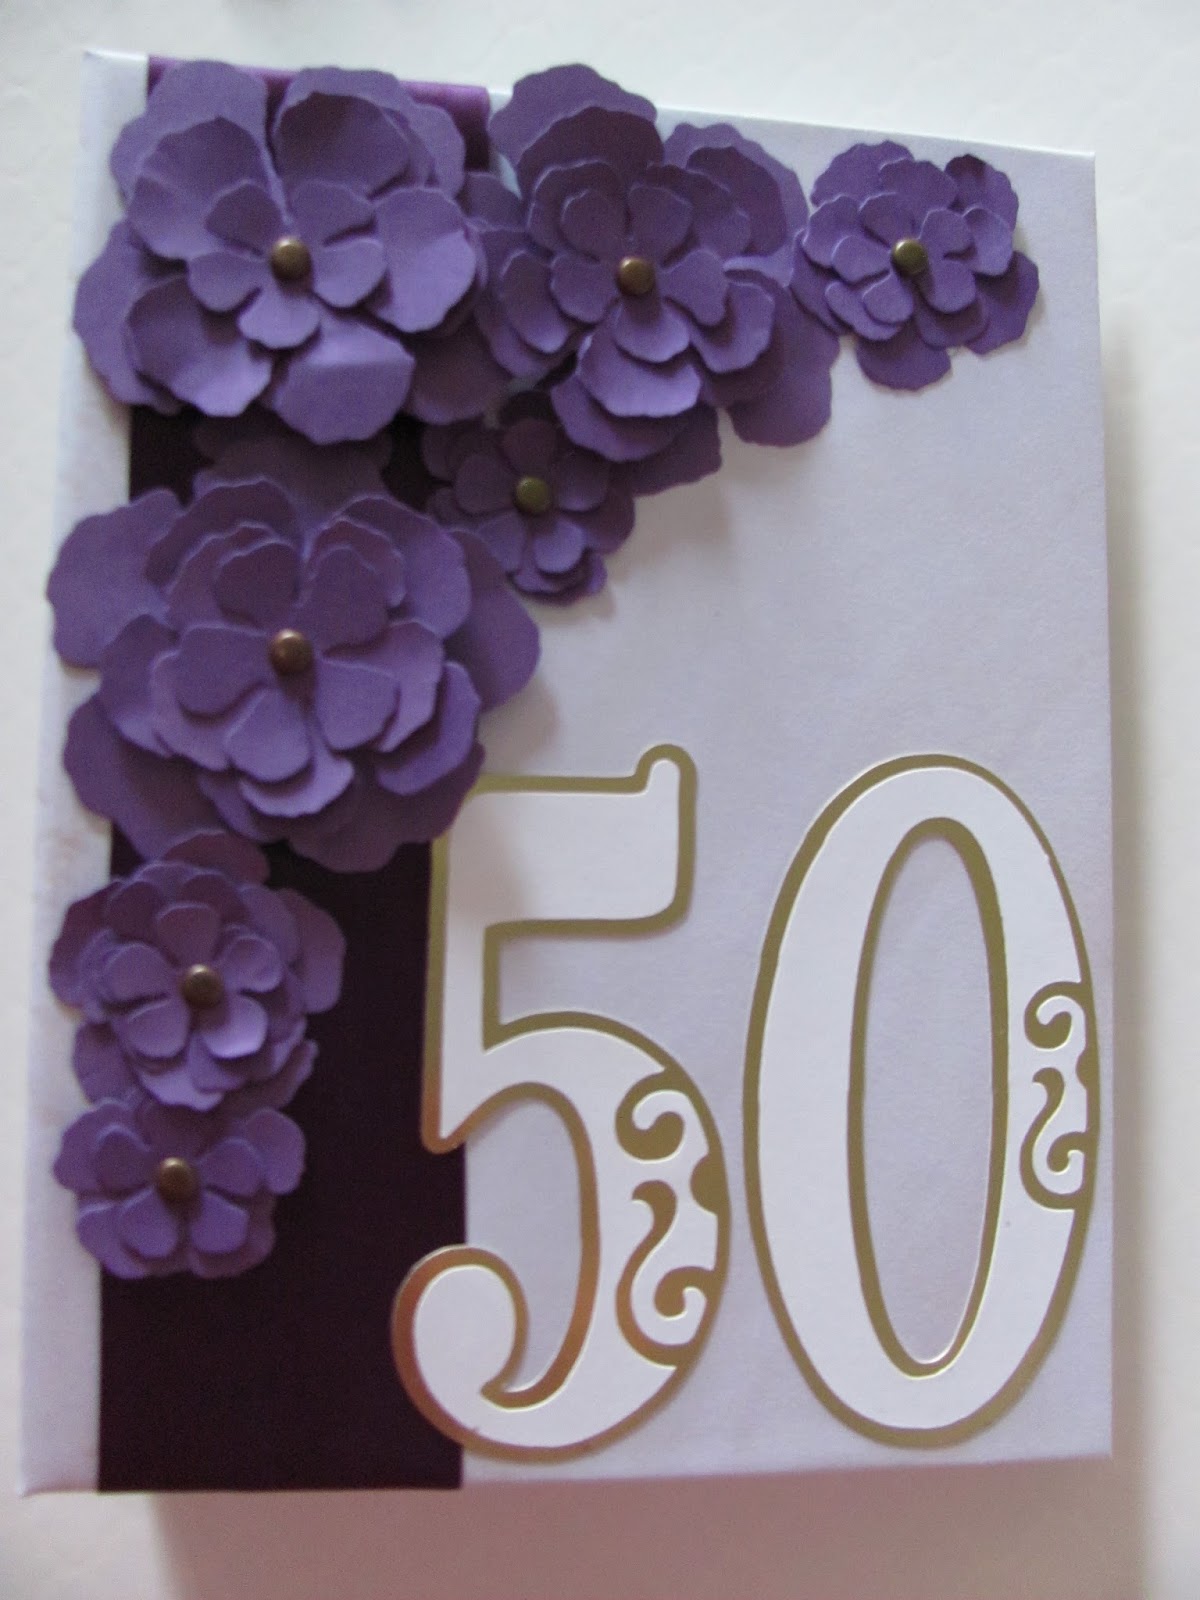 What To Say In A Card For A 50th Wedding Anniversary